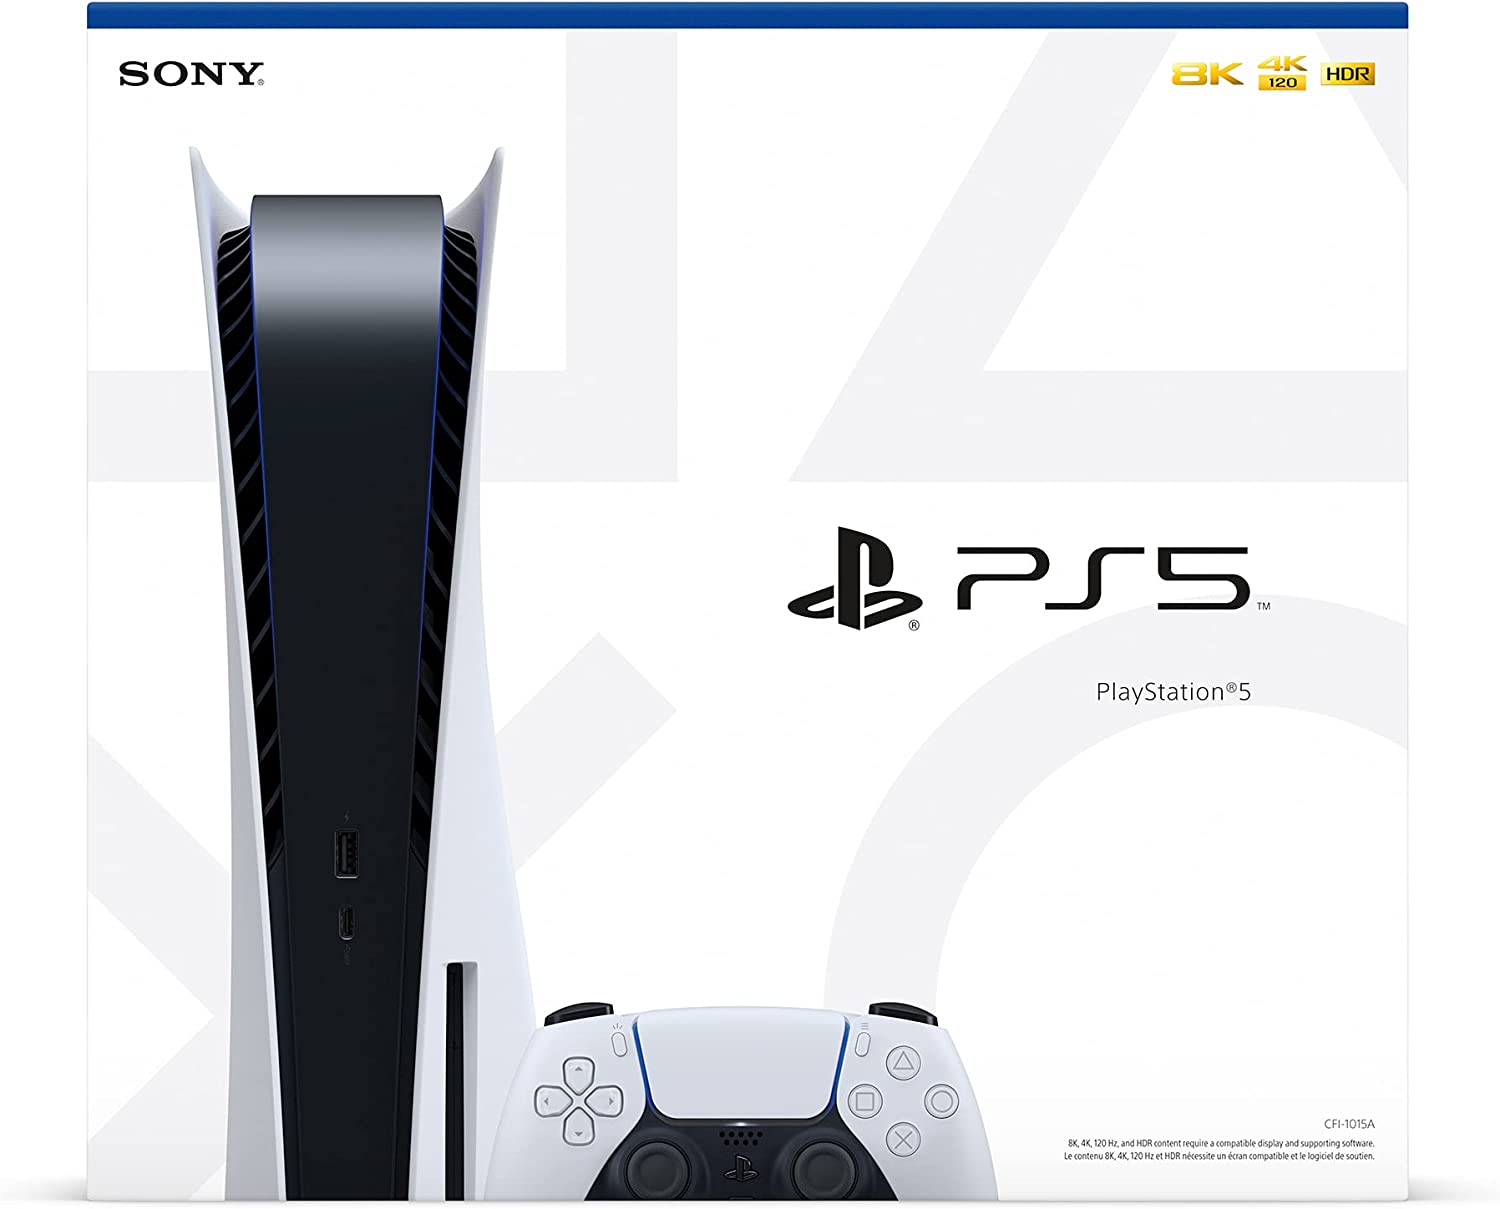 Playstation 5 Console (IN STORE PURCHASE ONLY) $599.99